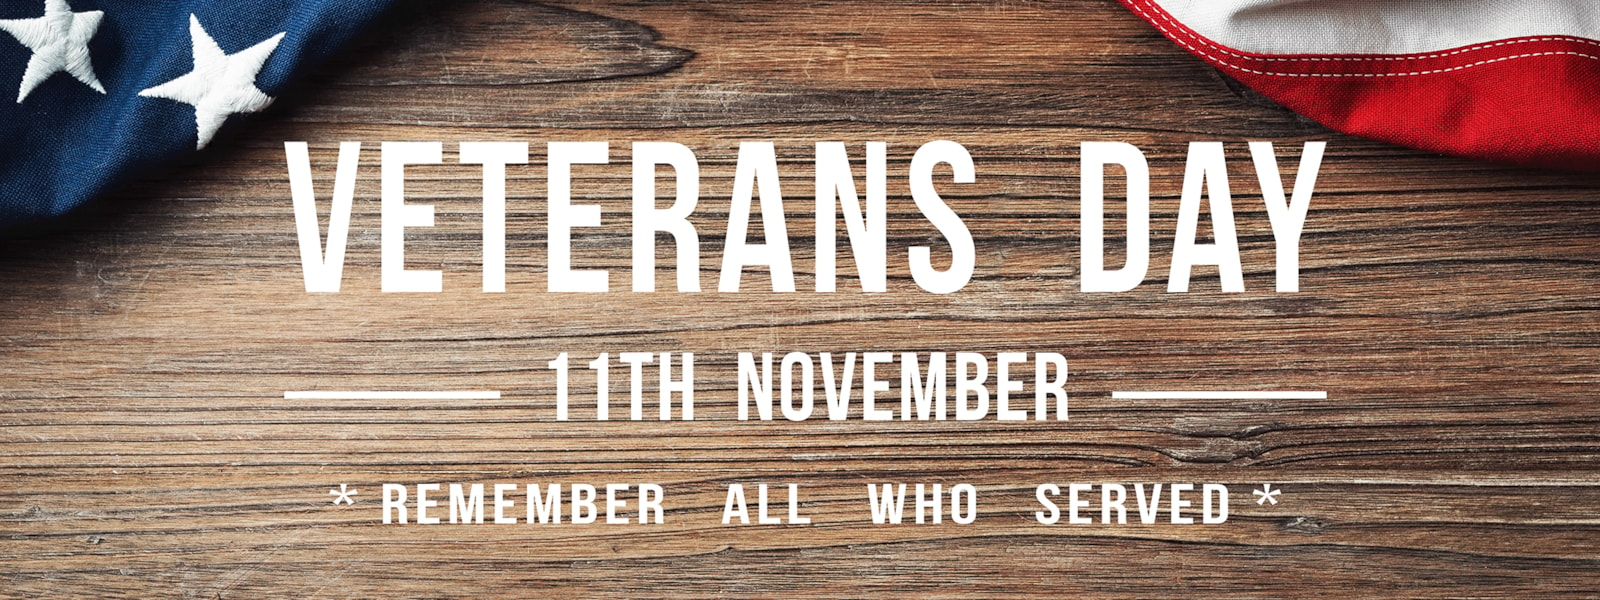 wood background behind a US Flag and Veterans Day 11th November *Remember All Who Served*